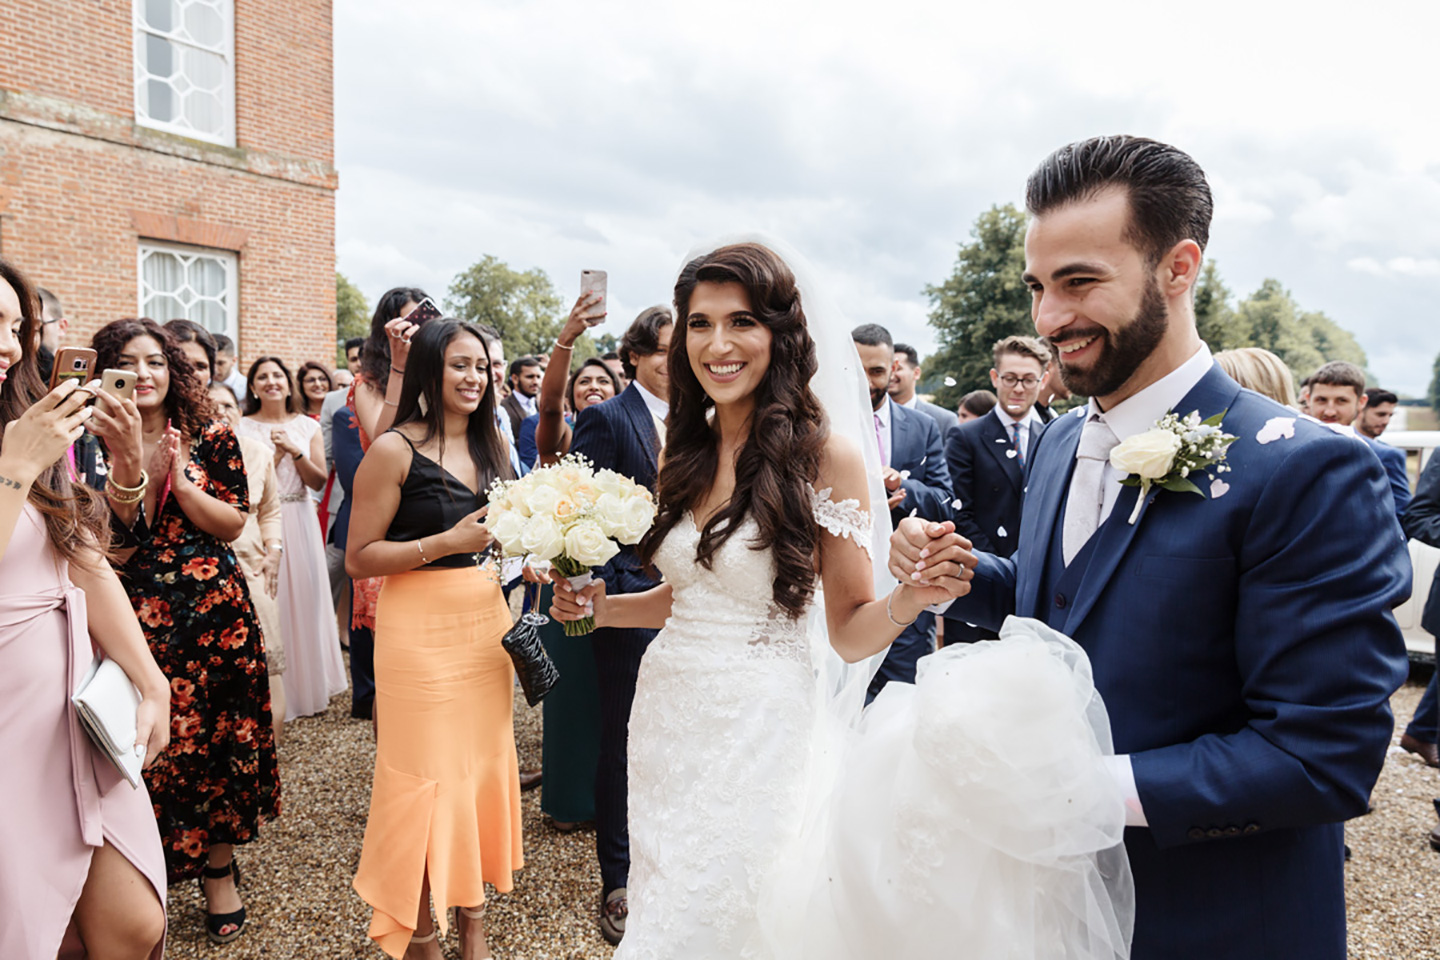 Newlyweds are greeted by guests for their Asian wedding reception at Braxted Park in Essex